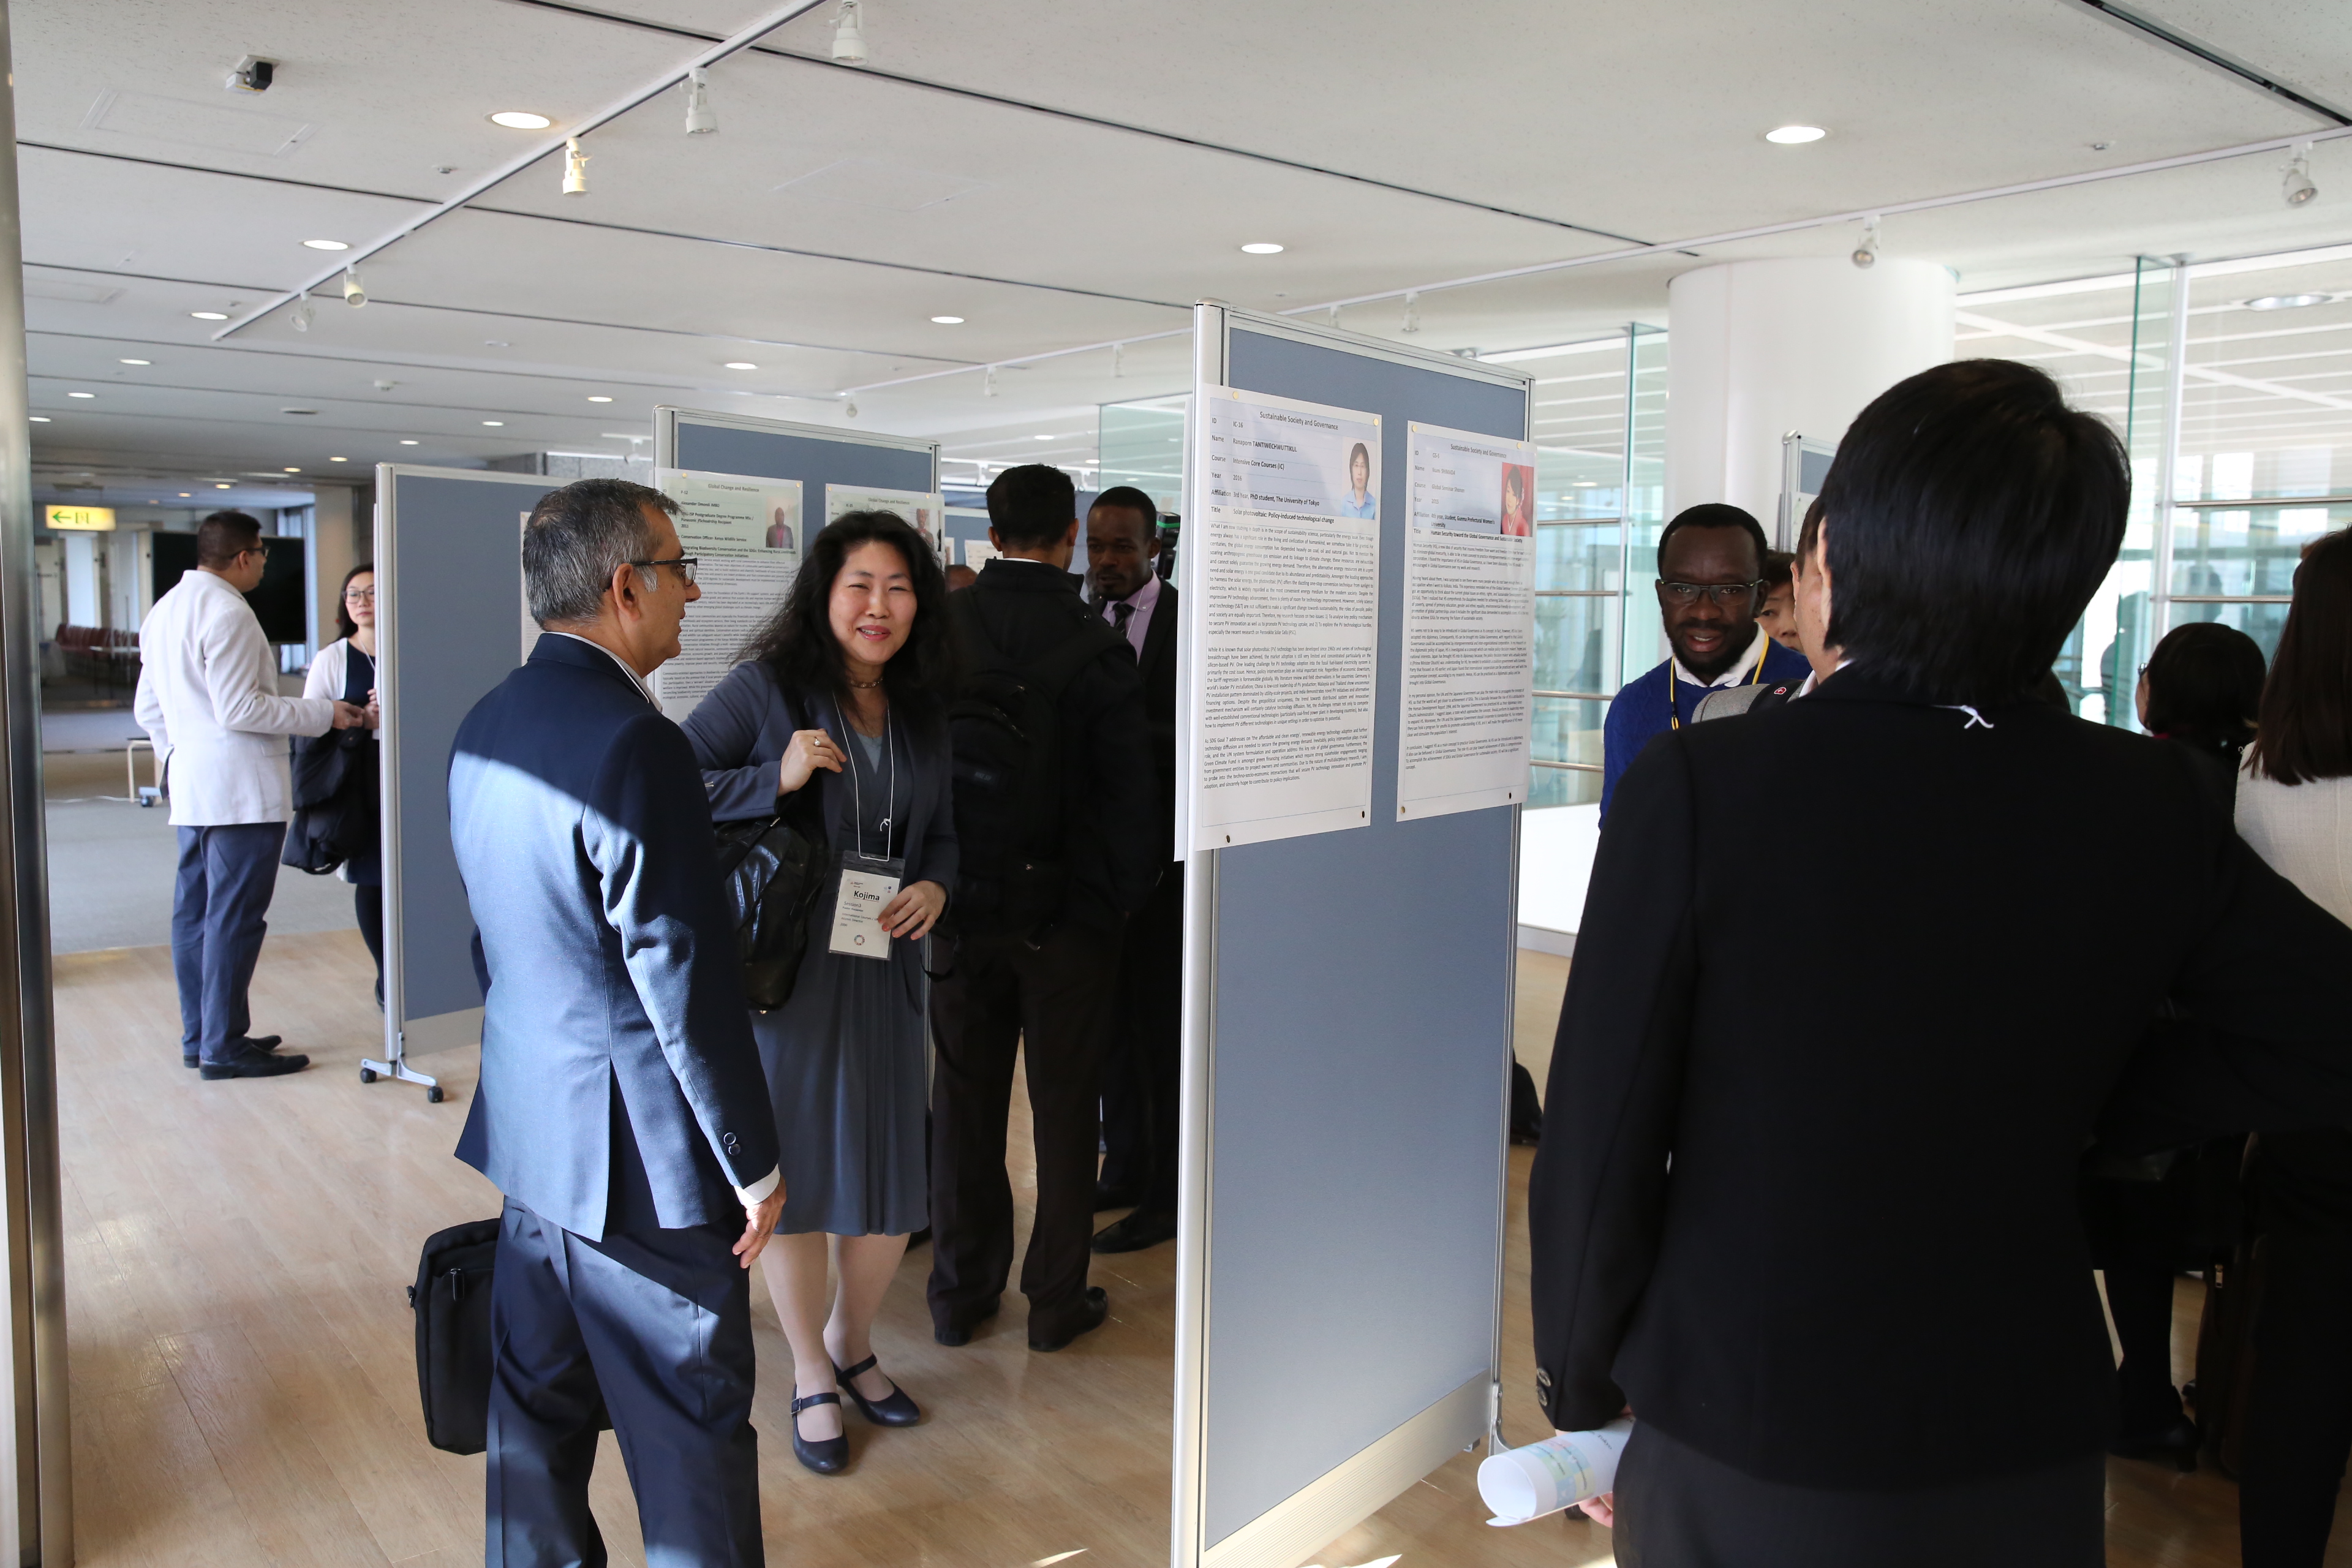 Participants at the Poster Presentation session